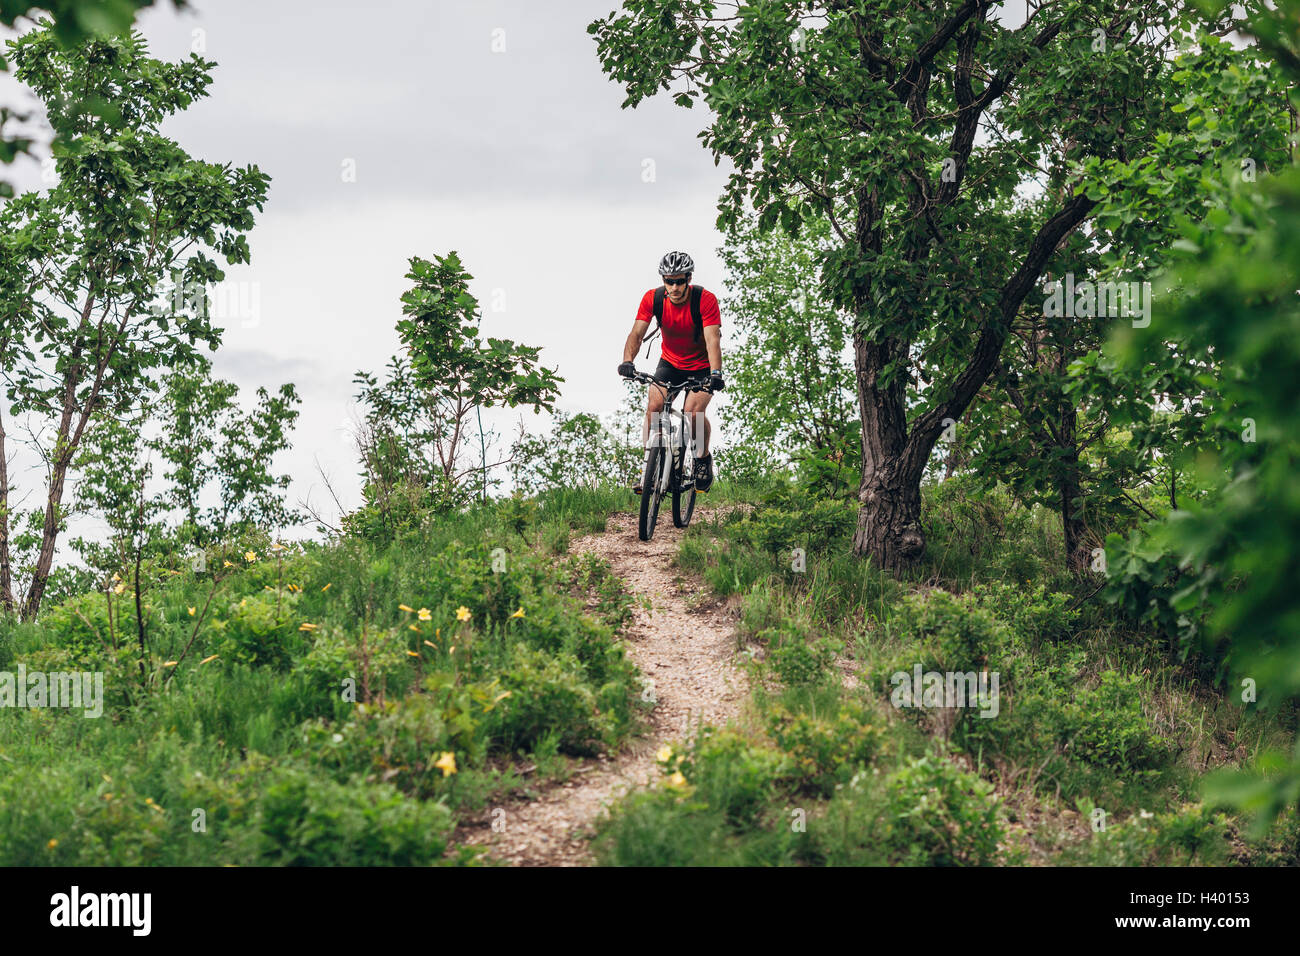 Man mountain biking on dirt track Banque D'Images